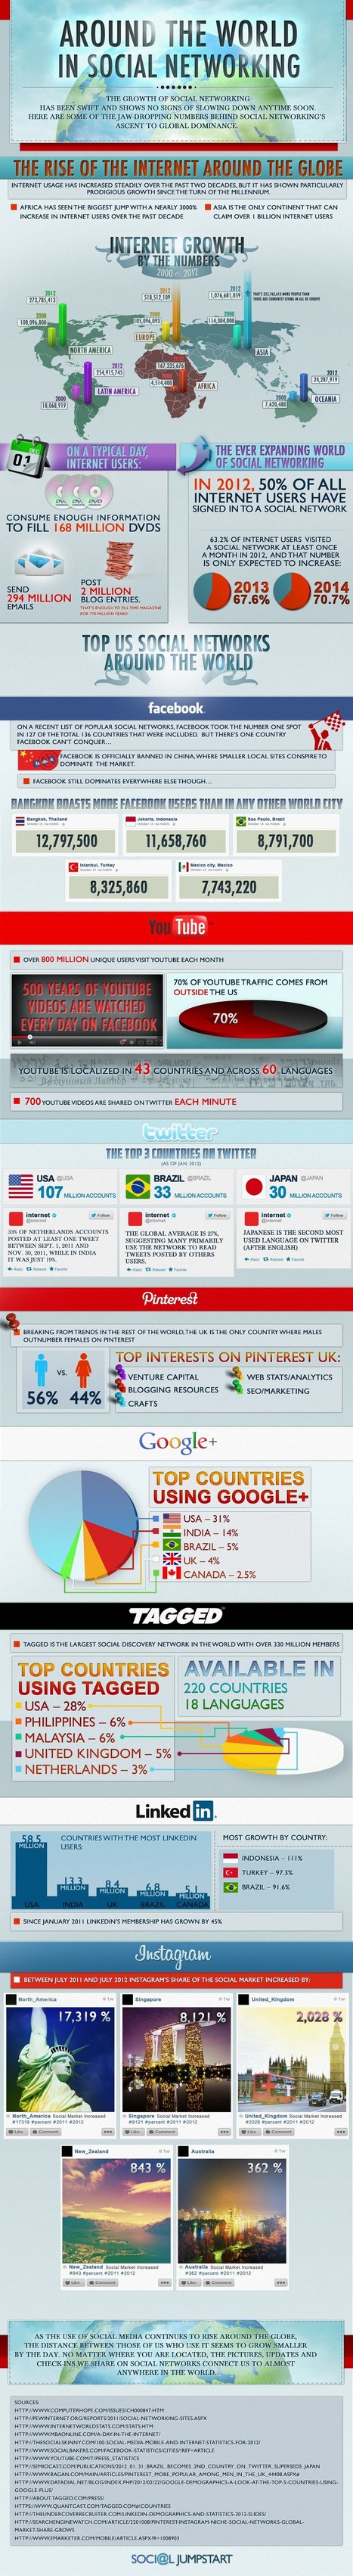 Social Media Around the World: A Complete Infographic Guide | Didactics and Technology in Education | Scoop.it